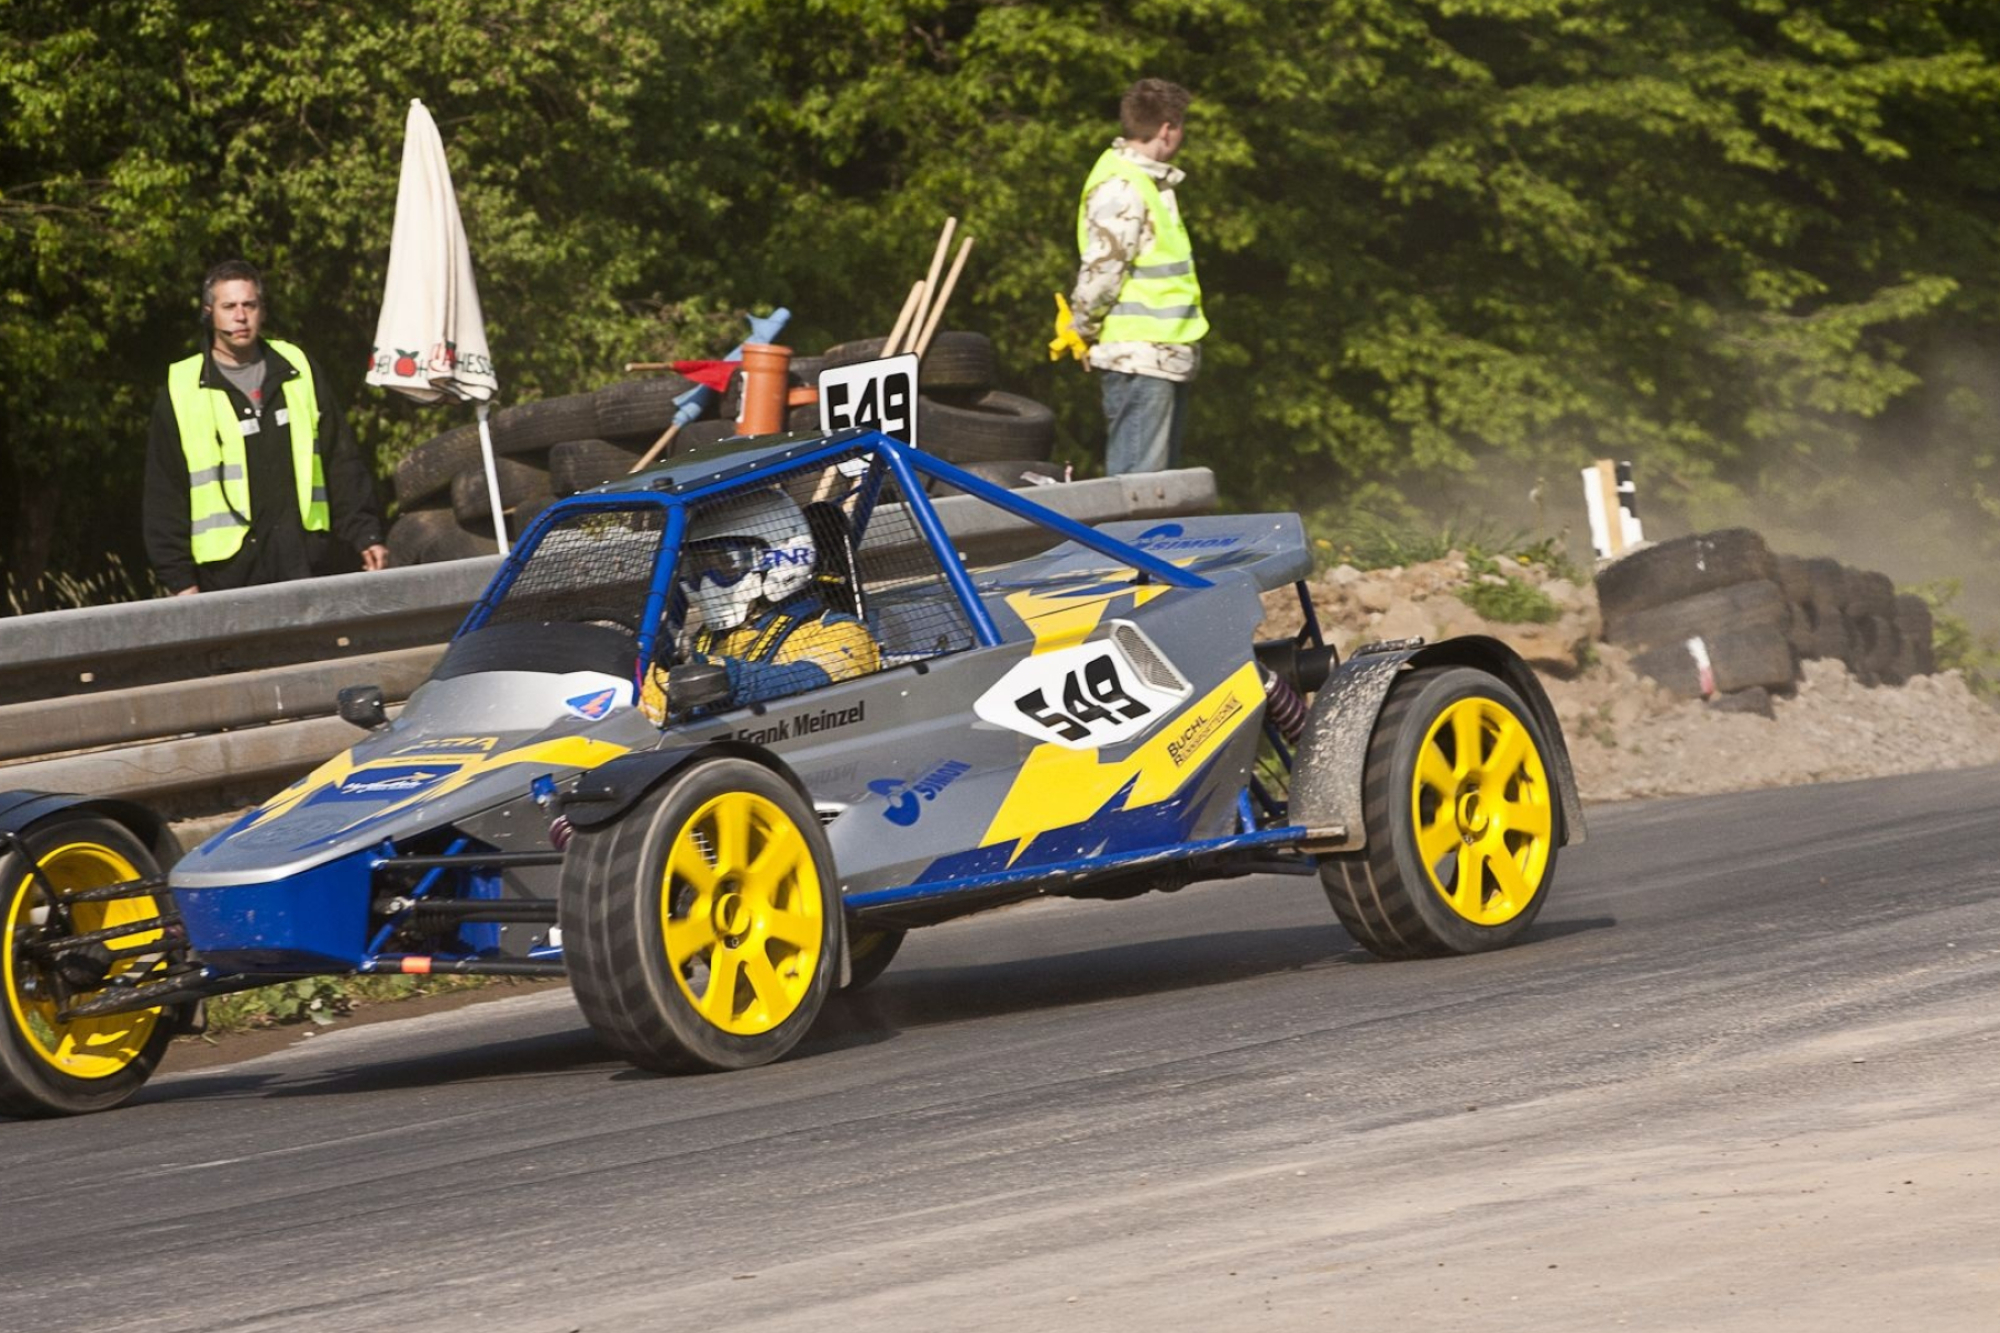 Autocross: Frank Meinzel drives a purpose-built buggy at the Auto-X competitive event. 2000x1340 HD Background.